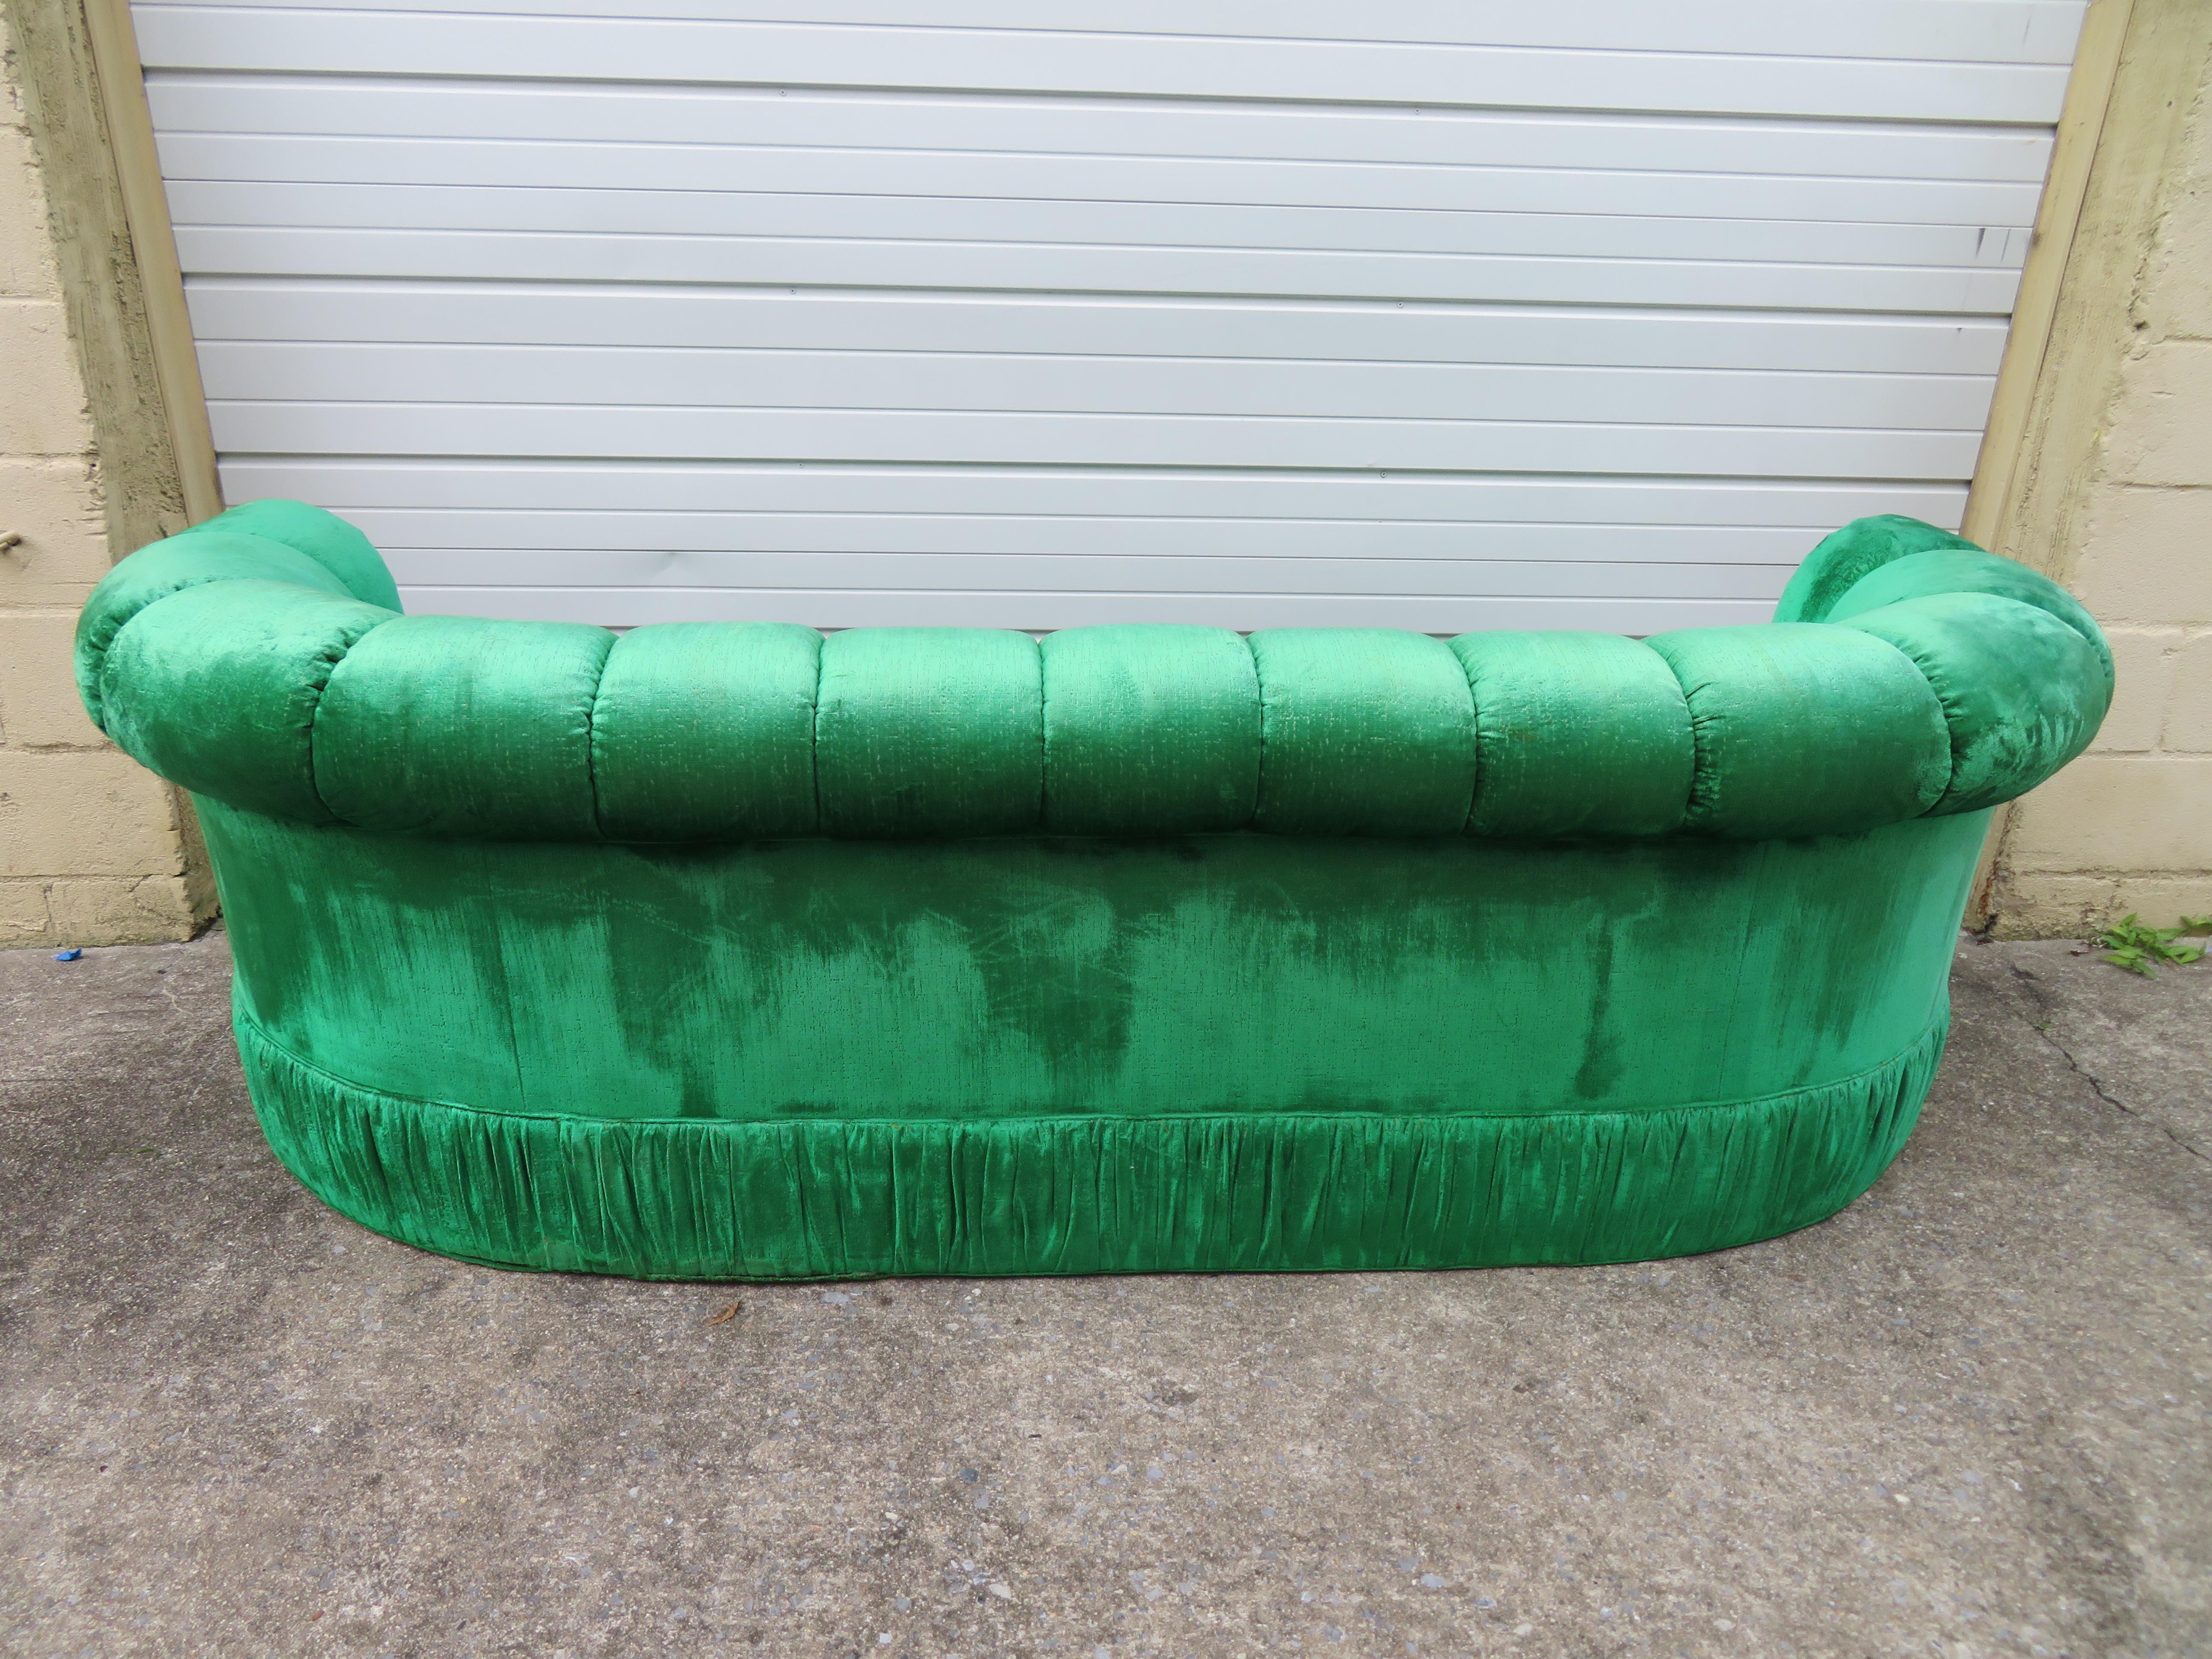 Spectacular Hollywood Regency Tufted Curved Kidney Sofa In Good Condition For Sale In Pemberton, NJ